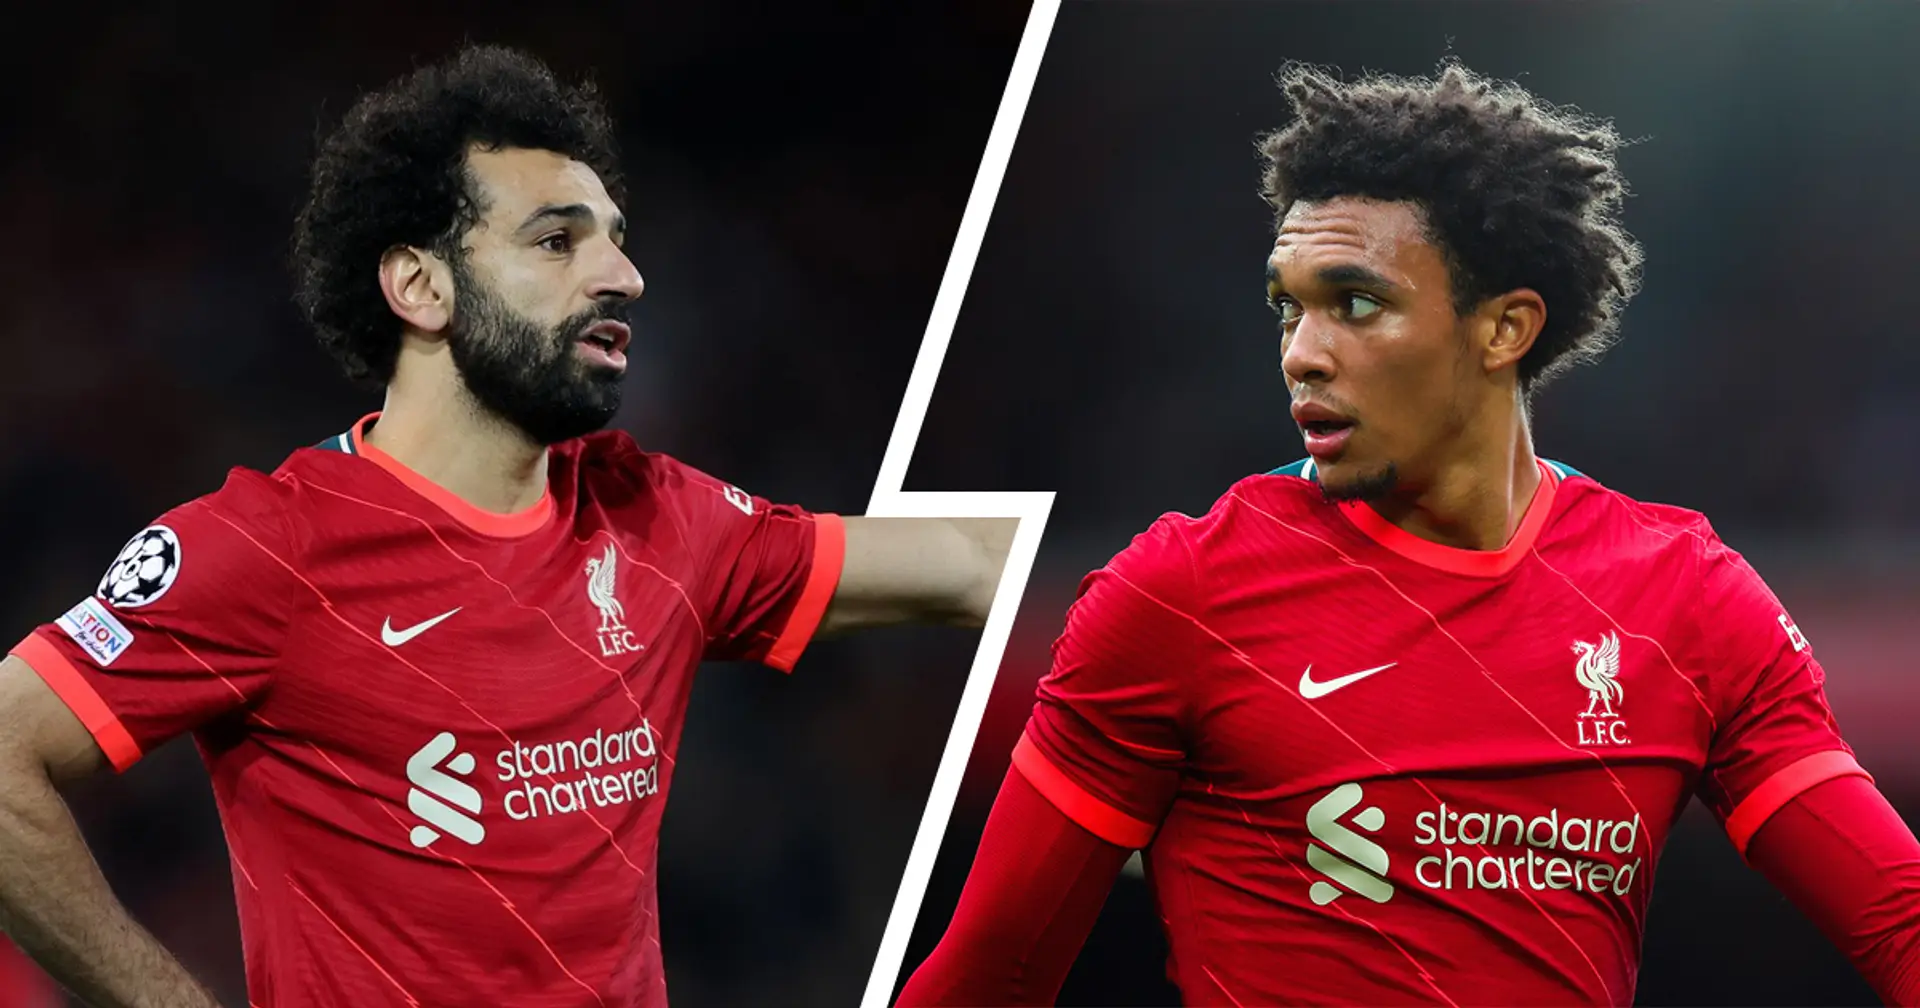 2 Liverpool players up for PL Player of the Month award - Salah not in shortlist